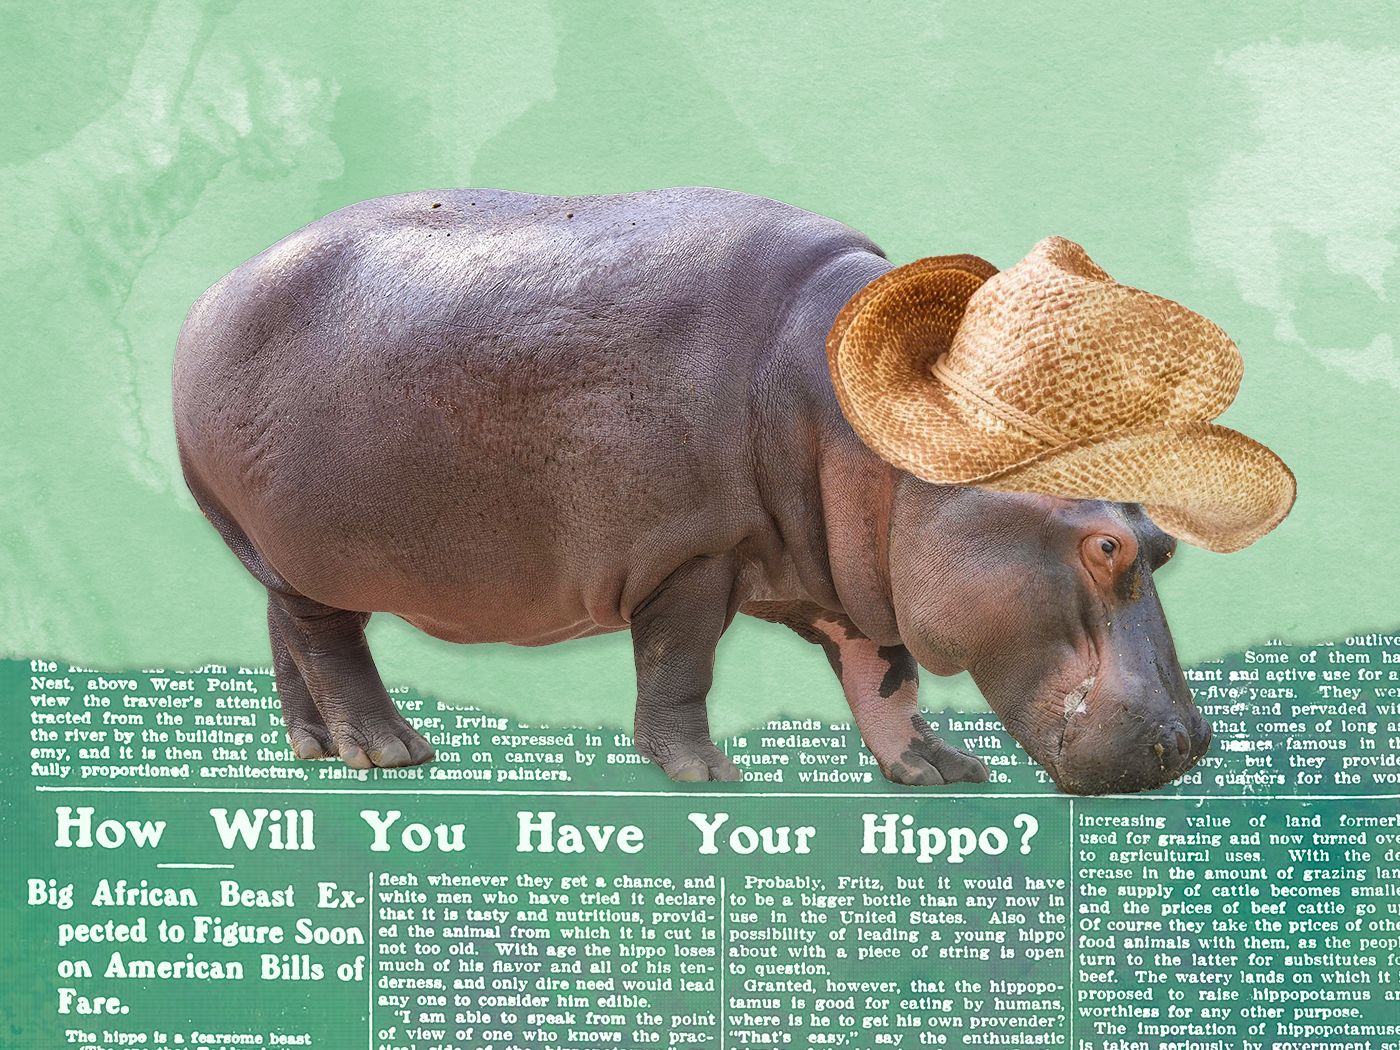 In 1910, a failed House bill sought to increase the availability of low-cost meat by importing hippopotamuses that would be killed to make “lake